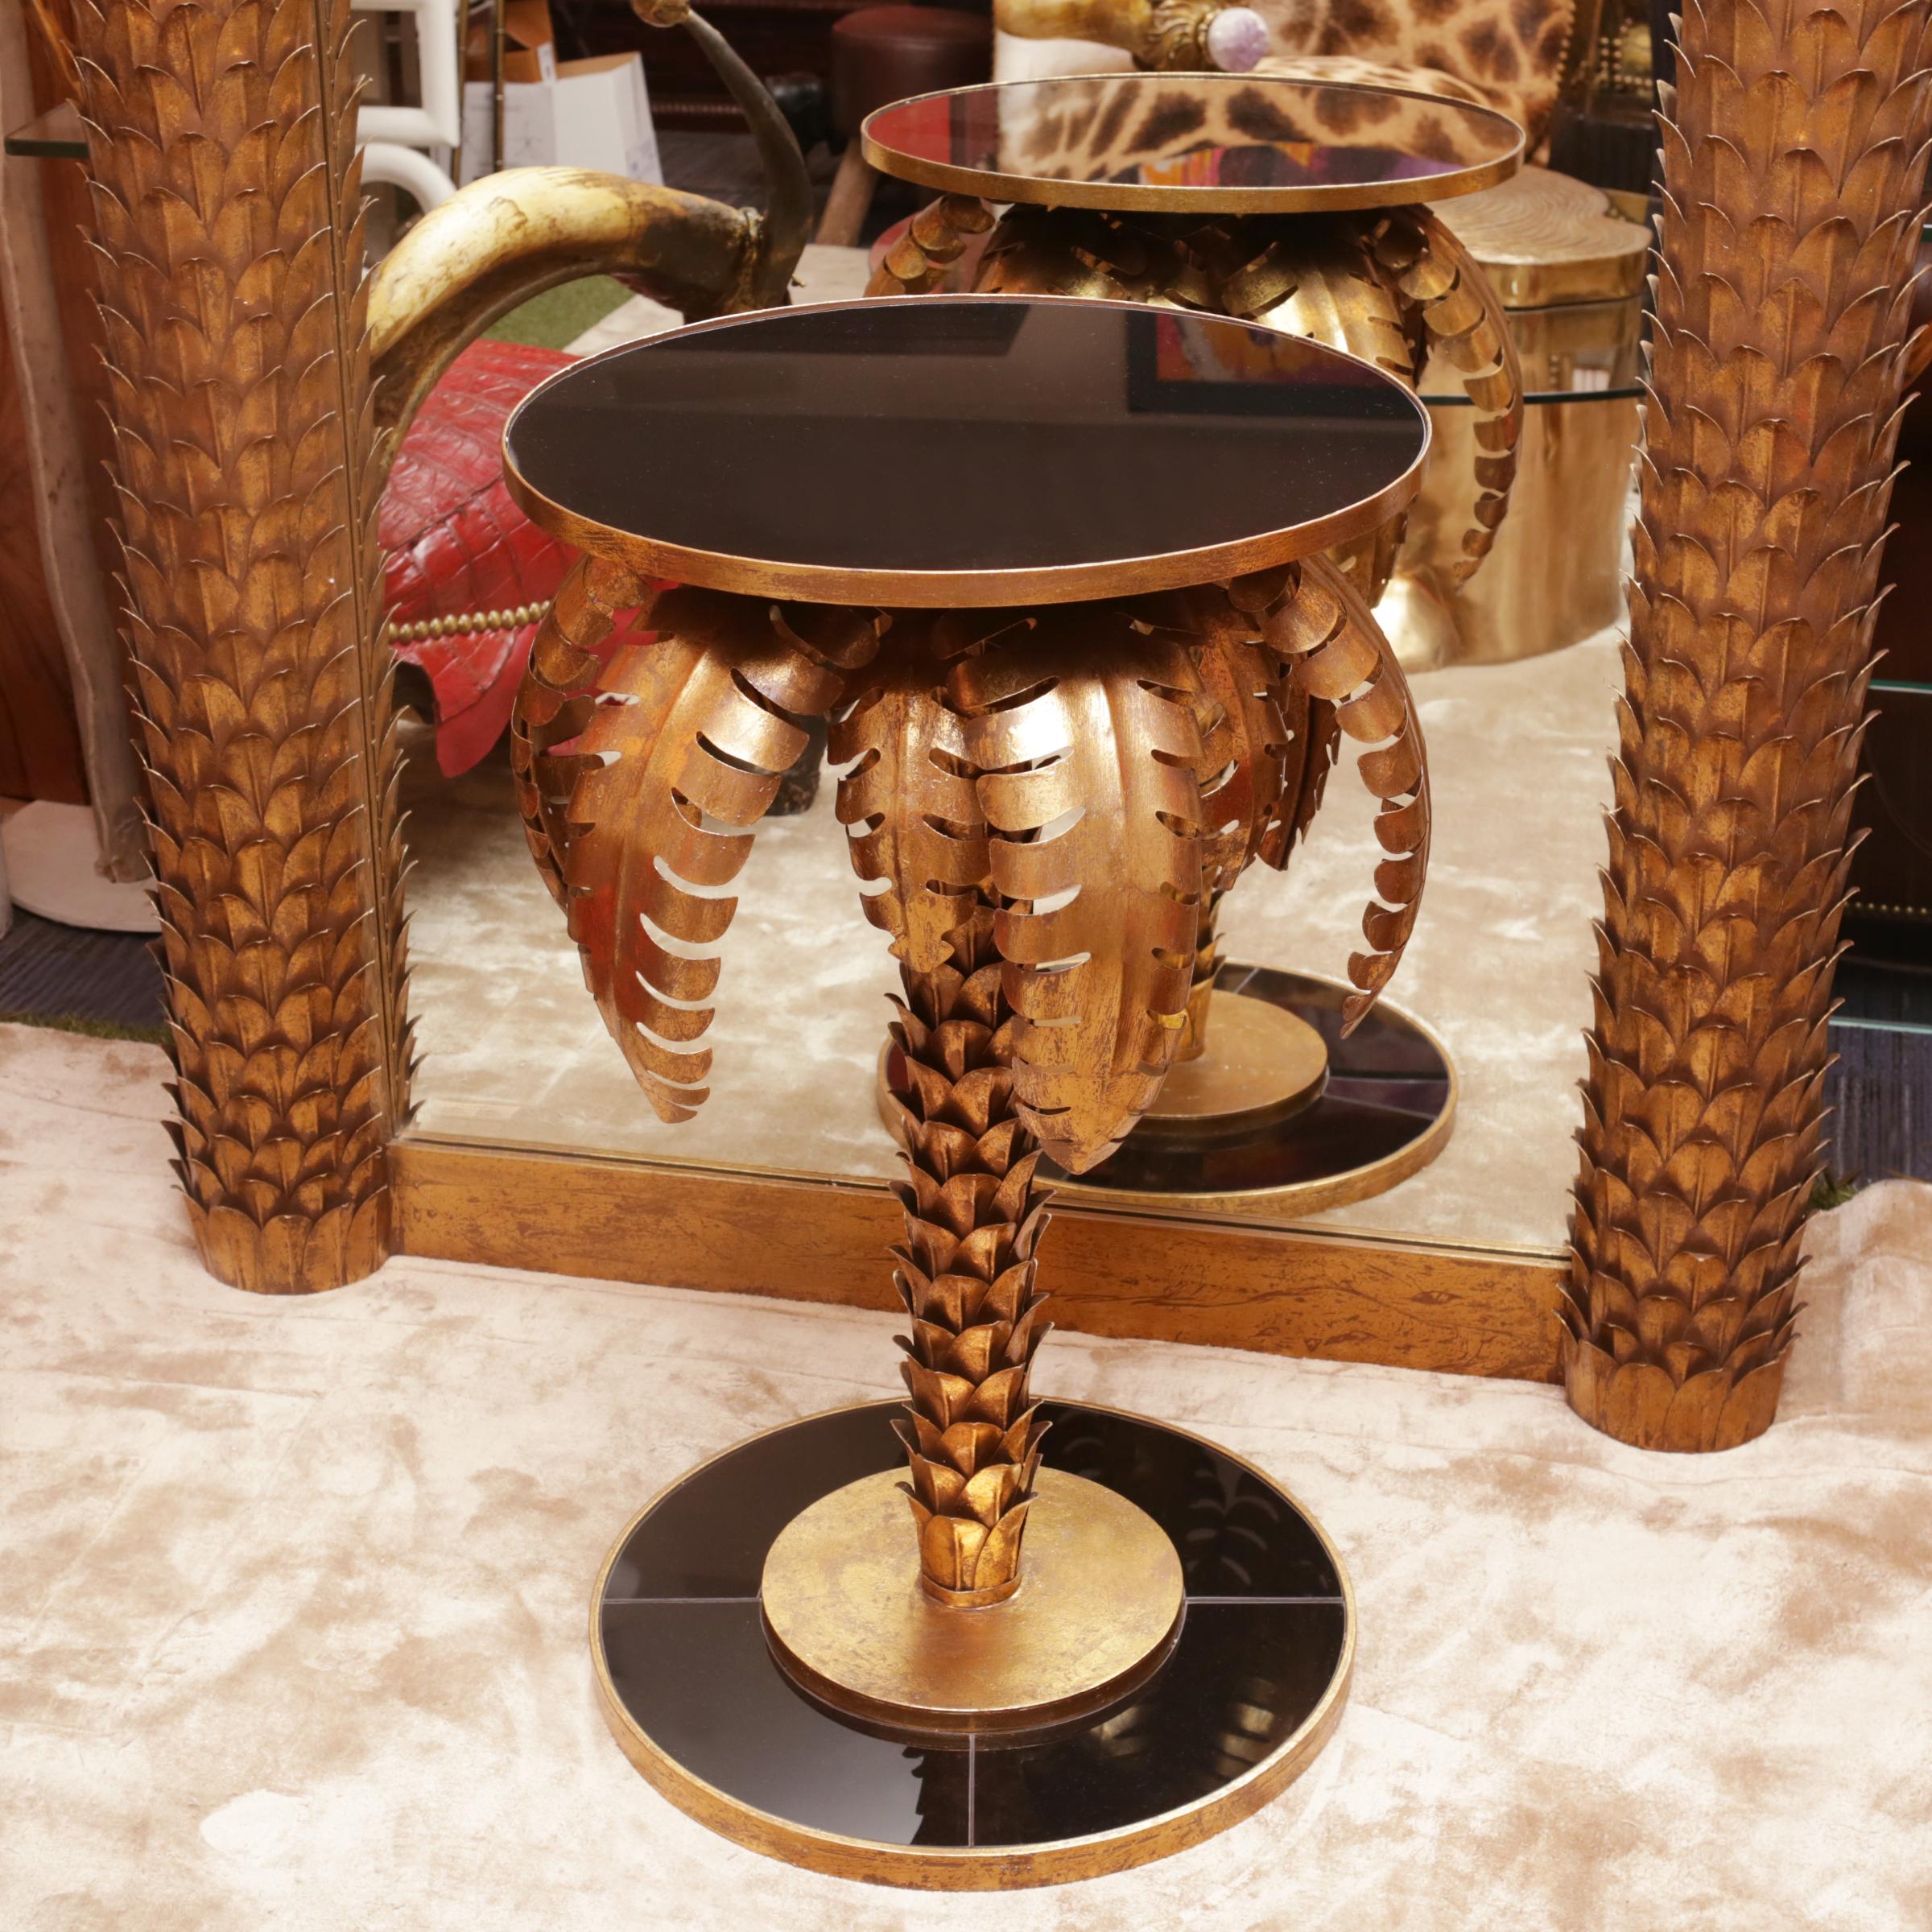 Side table gilded palmer in golded metal
in vintage brass finish. Made in France in 2019.